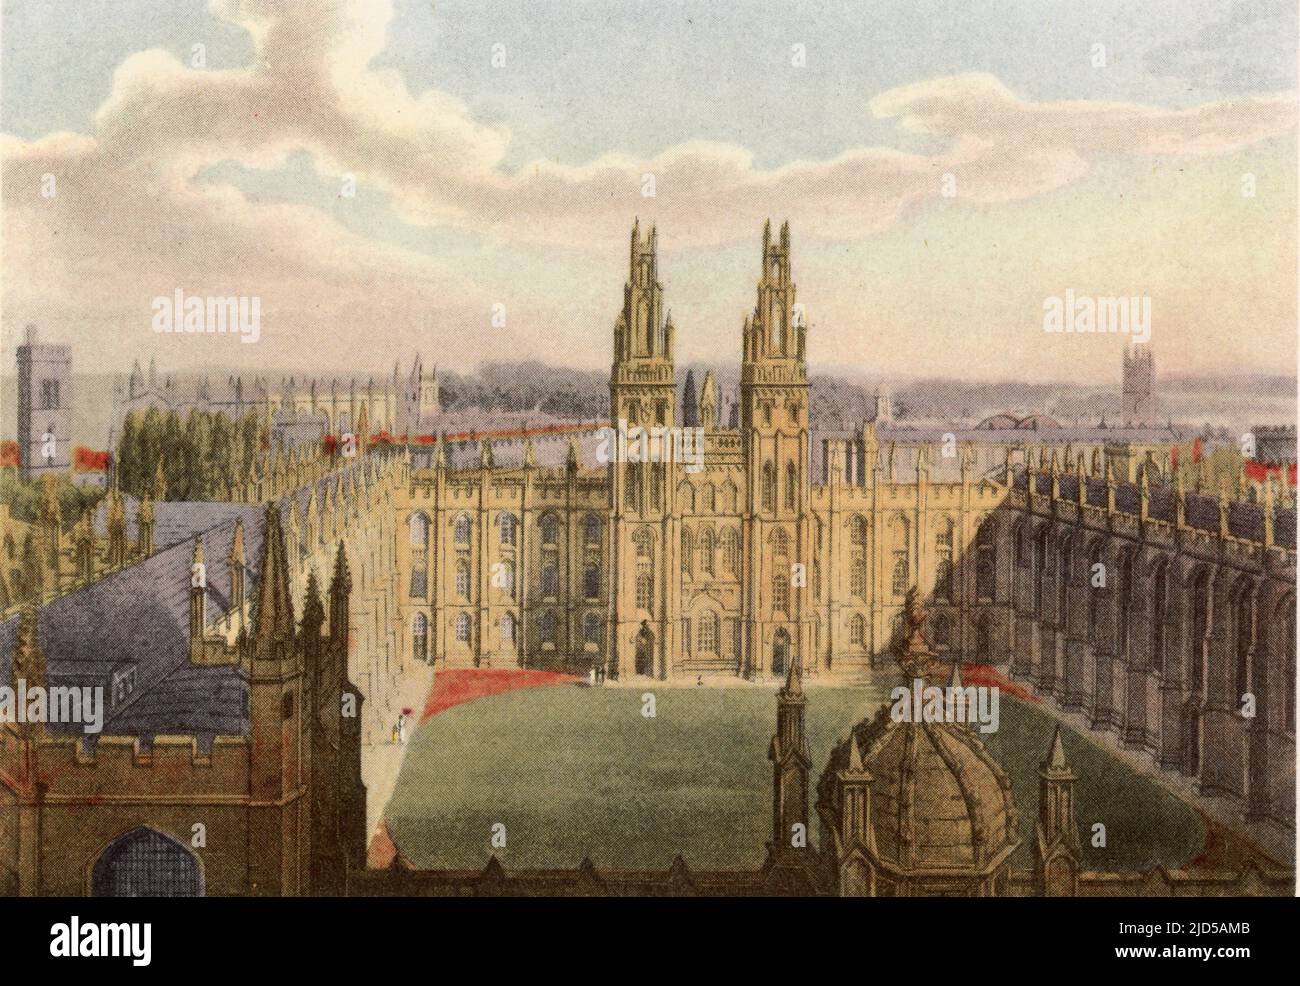 All Souls College, 1814. All Souls College is a constituent college of the University of Oxford in England. A print from 'A History of the University of Oxford, its Colleges, Halls, and Public Buildings', published by Rudolph Ackermann, 1814. Illustrated by Augustus Pugin, F. Mackenzie and others. Stock Photo